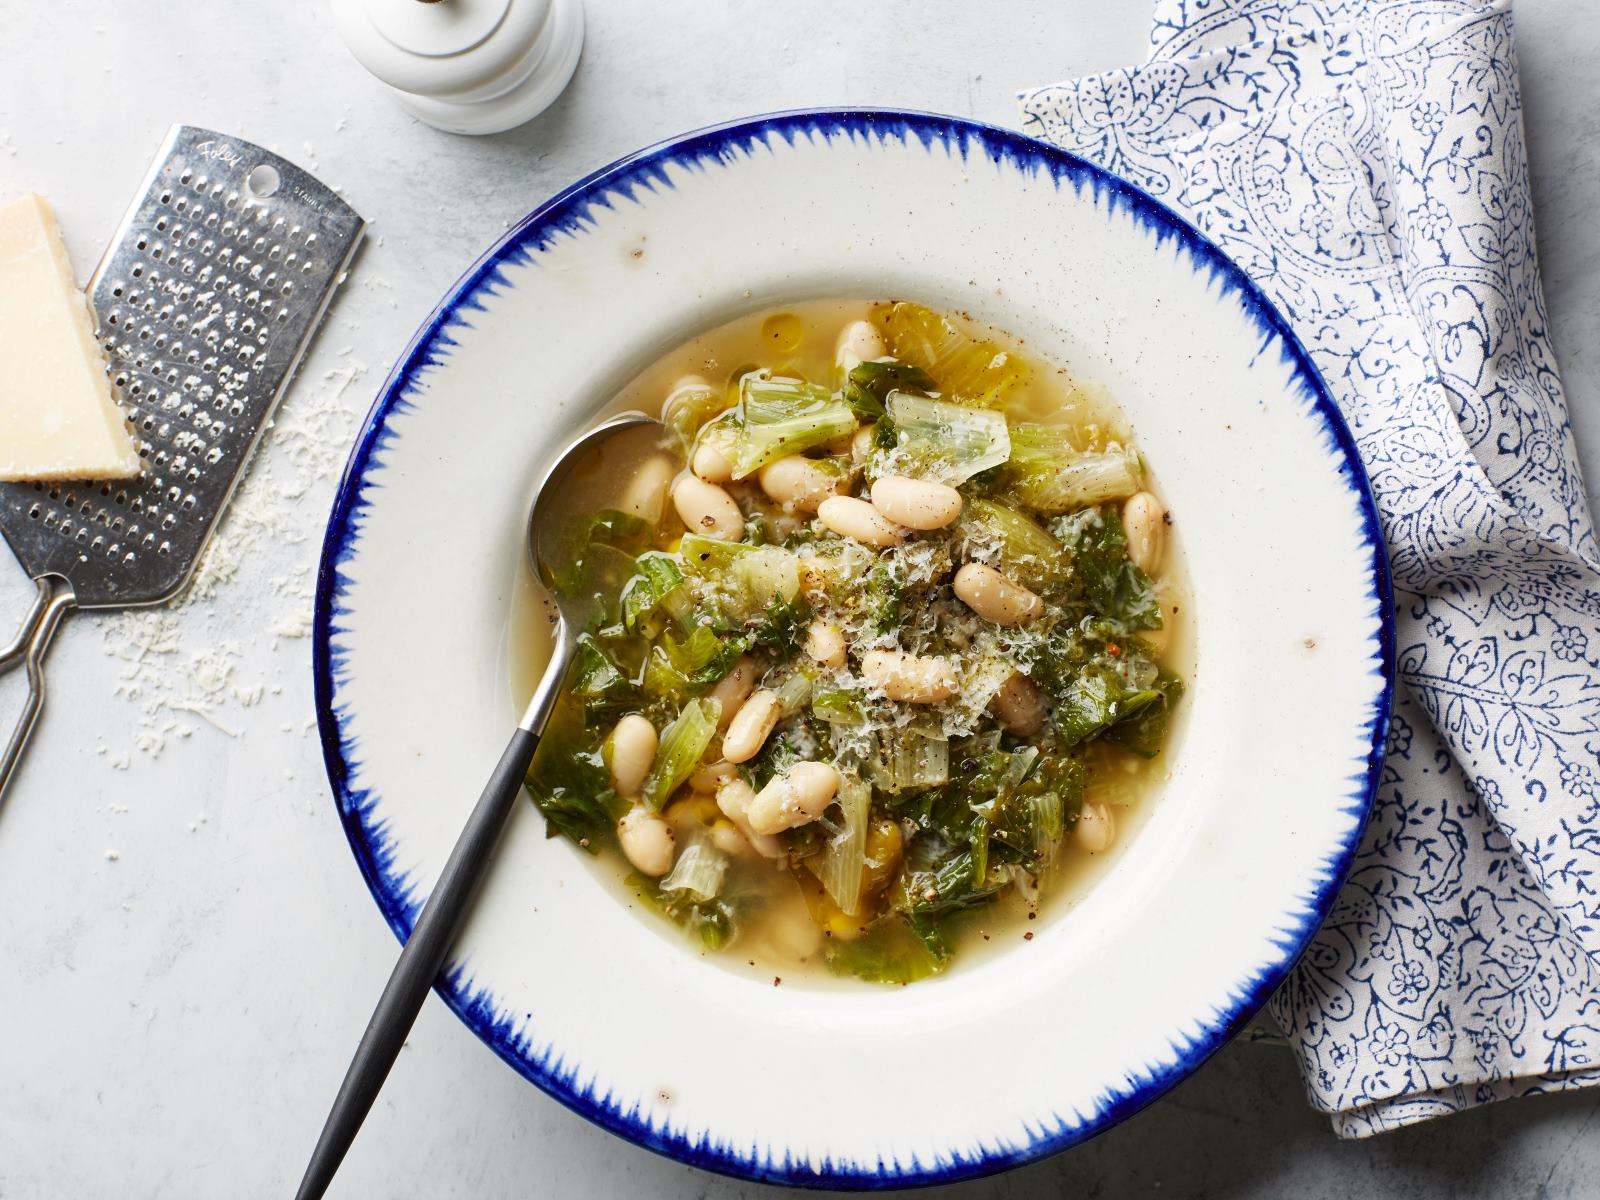 Delicious Escarole And Bean Recipe: A Mouthwatering Dish For Food Lovers